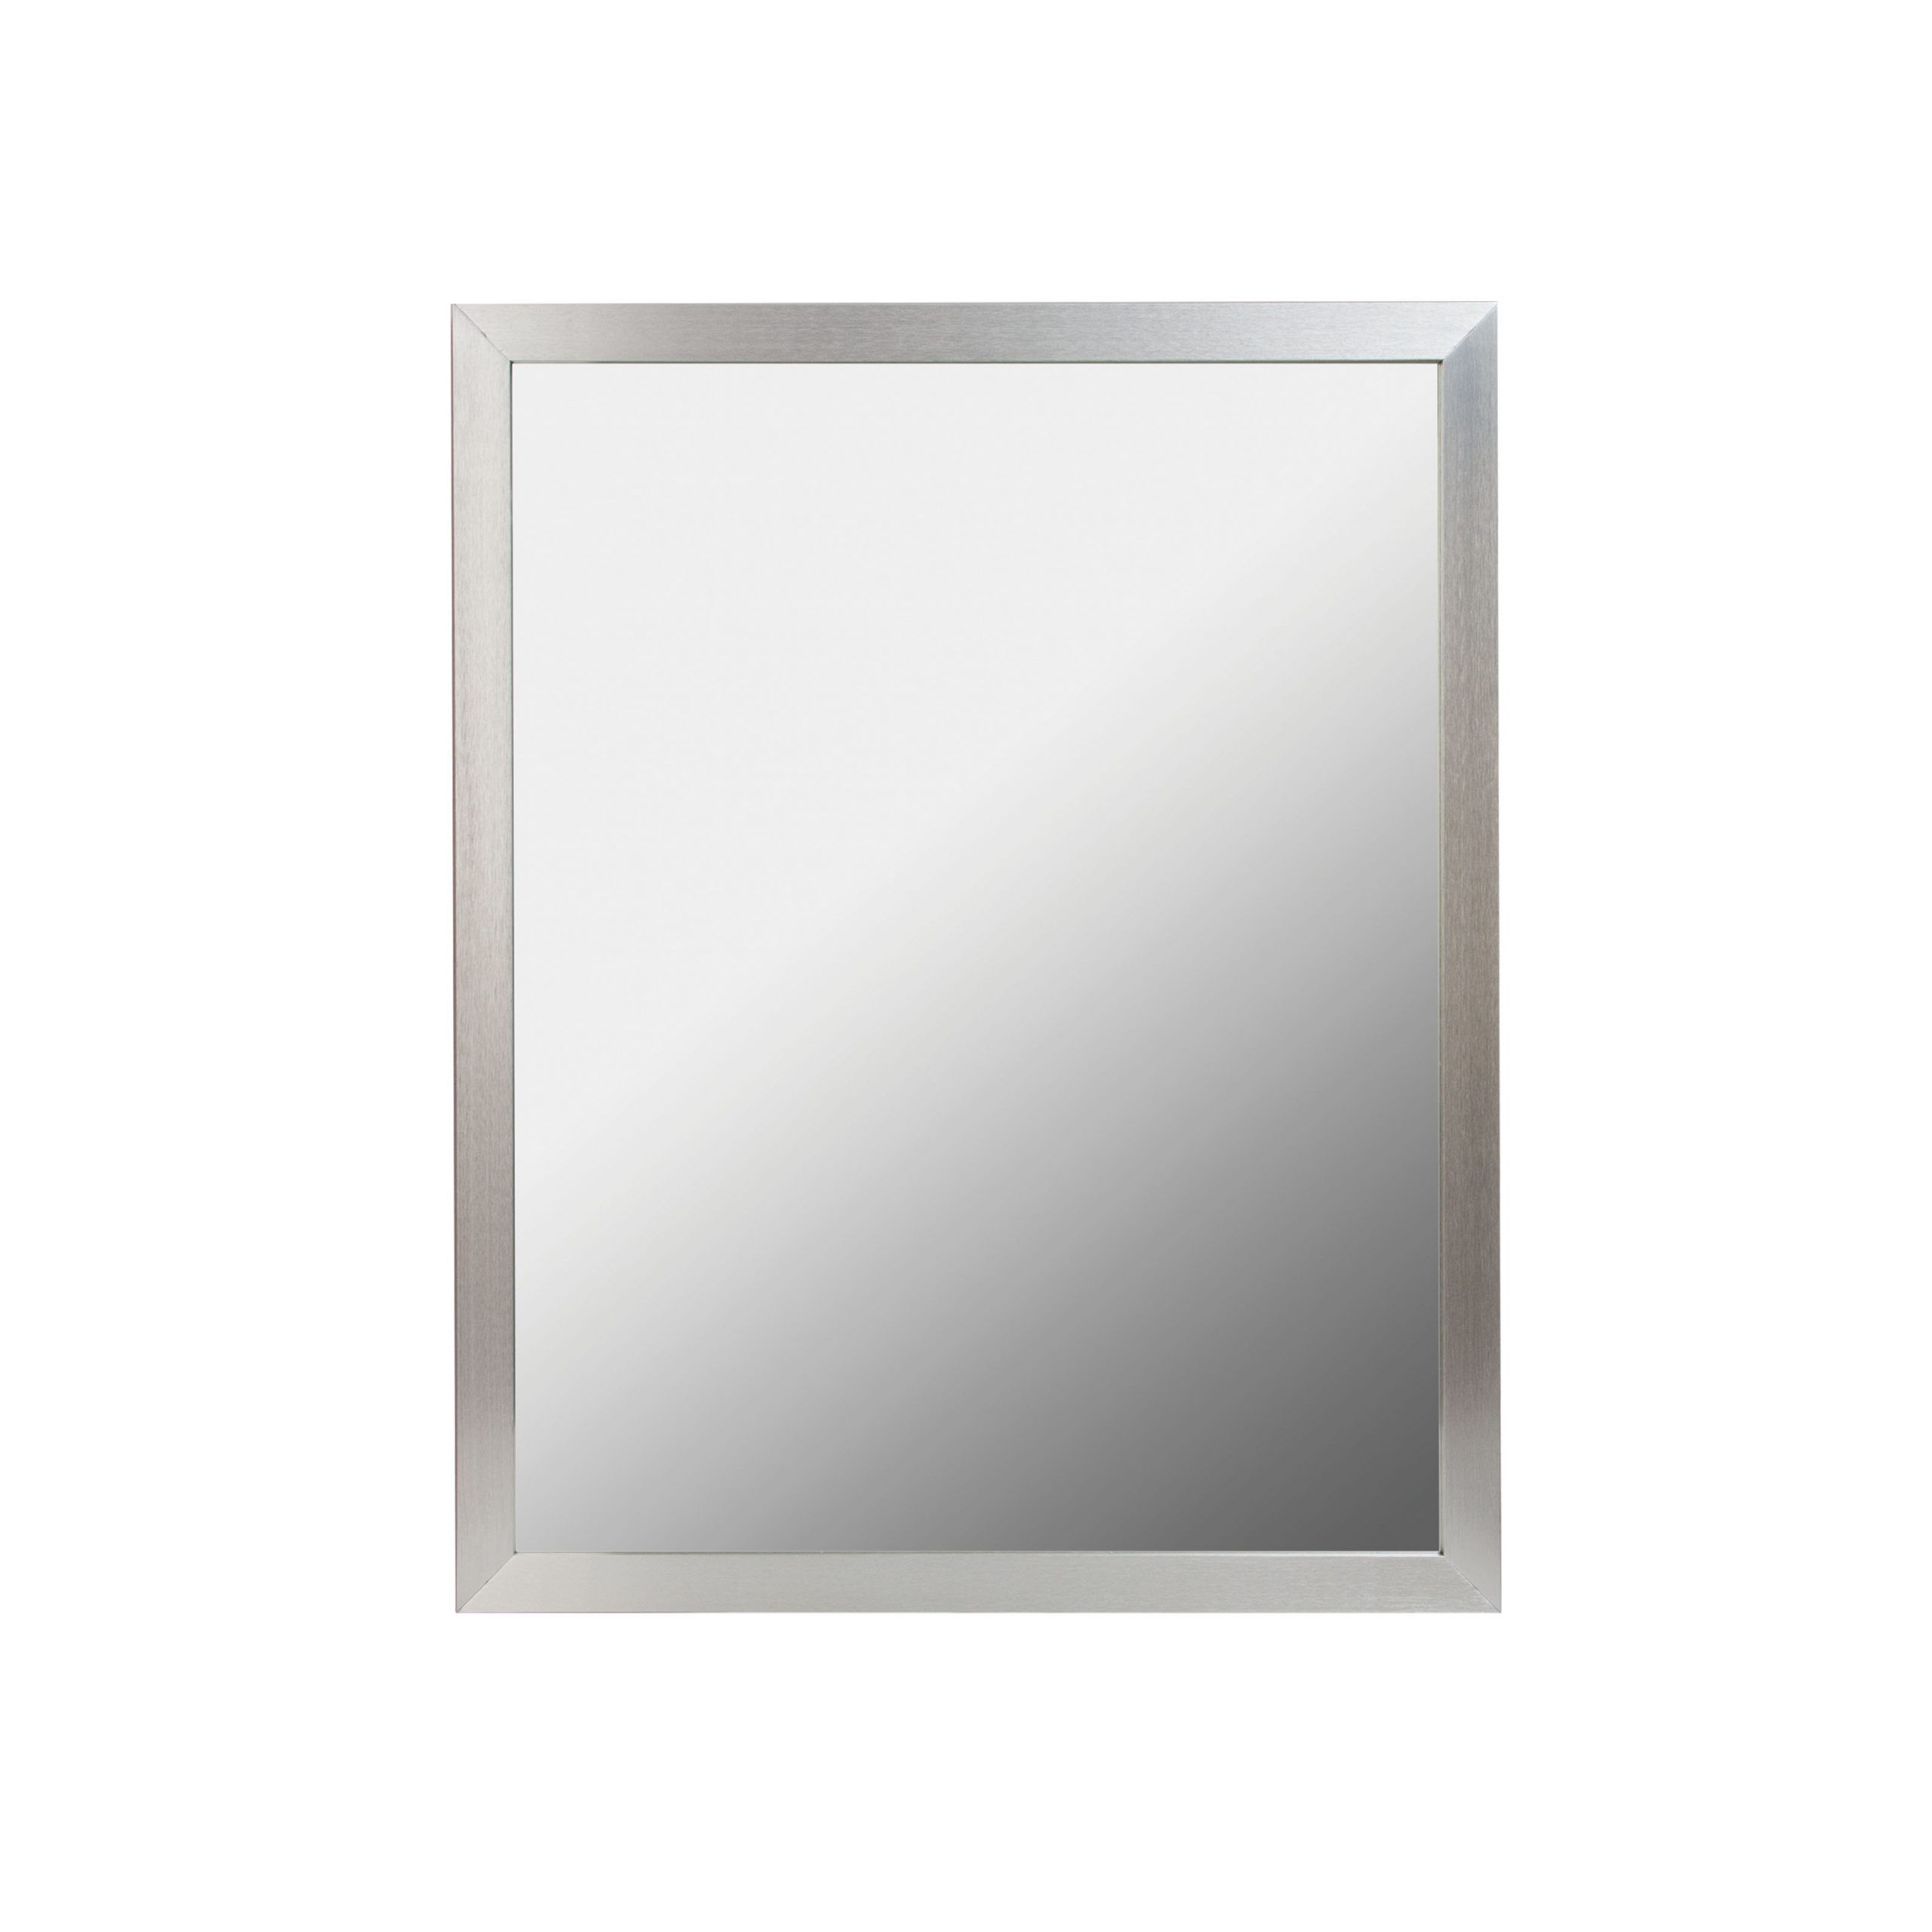 24x30 Aluminum Framed Mirror In Brushed Nickel – Foremost Bath Regarding Brushed Nickel Octagon Mirrors (View 3 of 15)